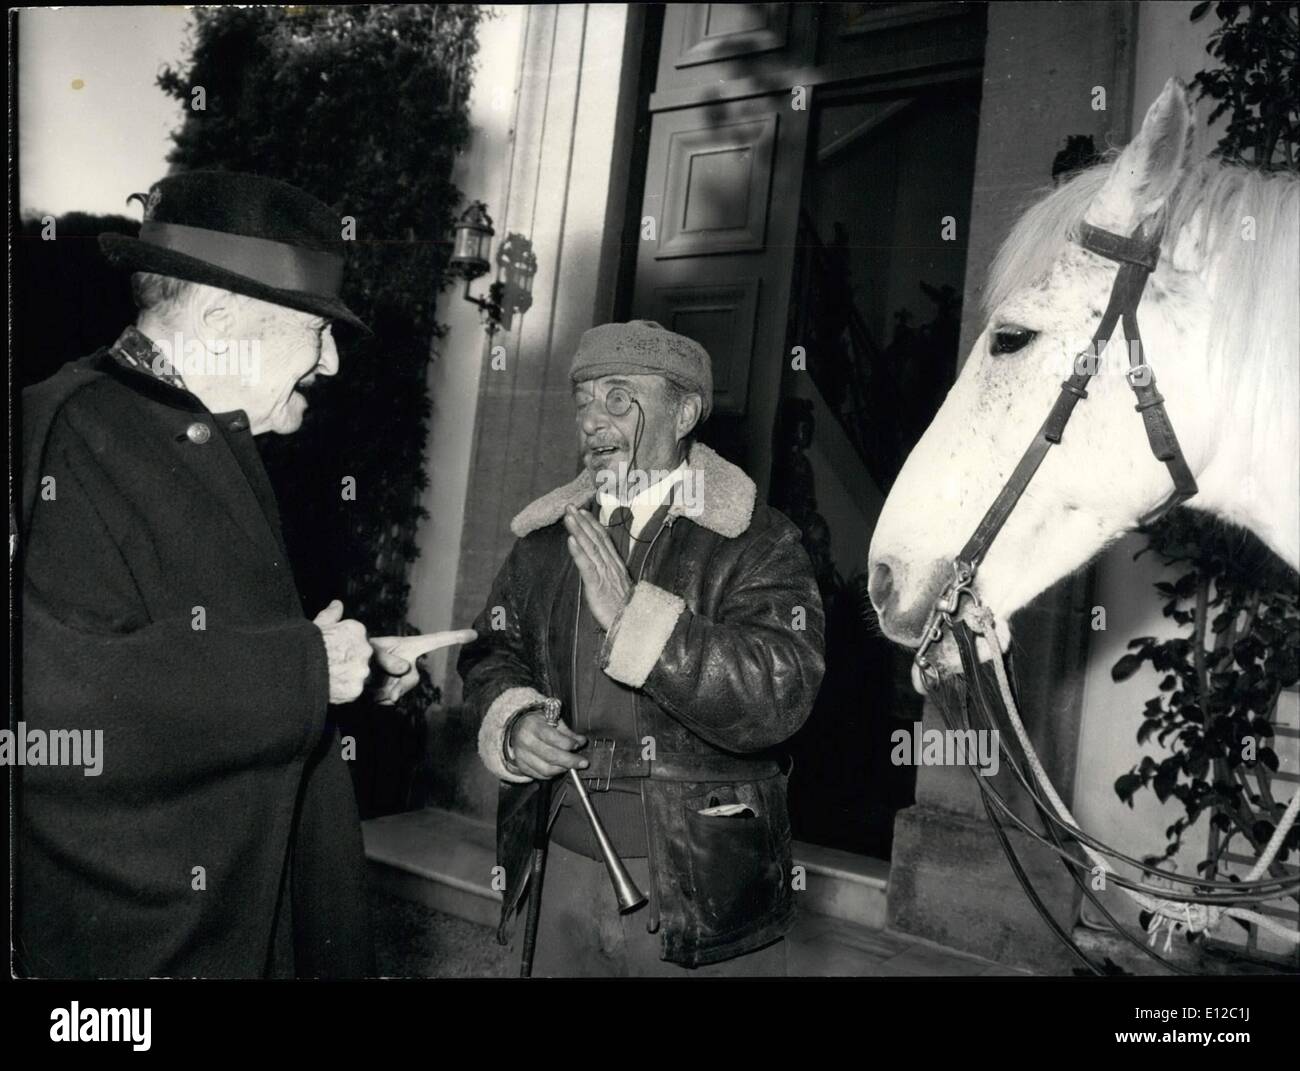 Dec. 16, 2011 - Somerset Maugham celebrates his 91st Birthday: Somerset Maugham celebrated his 91st Birthday in his villa at saint-Jean Ferrat (French Riviera) yesterday. Photo Shows Somerset Maugham pictured with a Friend, the English Author William Holt who came to see him riding a white horse. Stock Photo